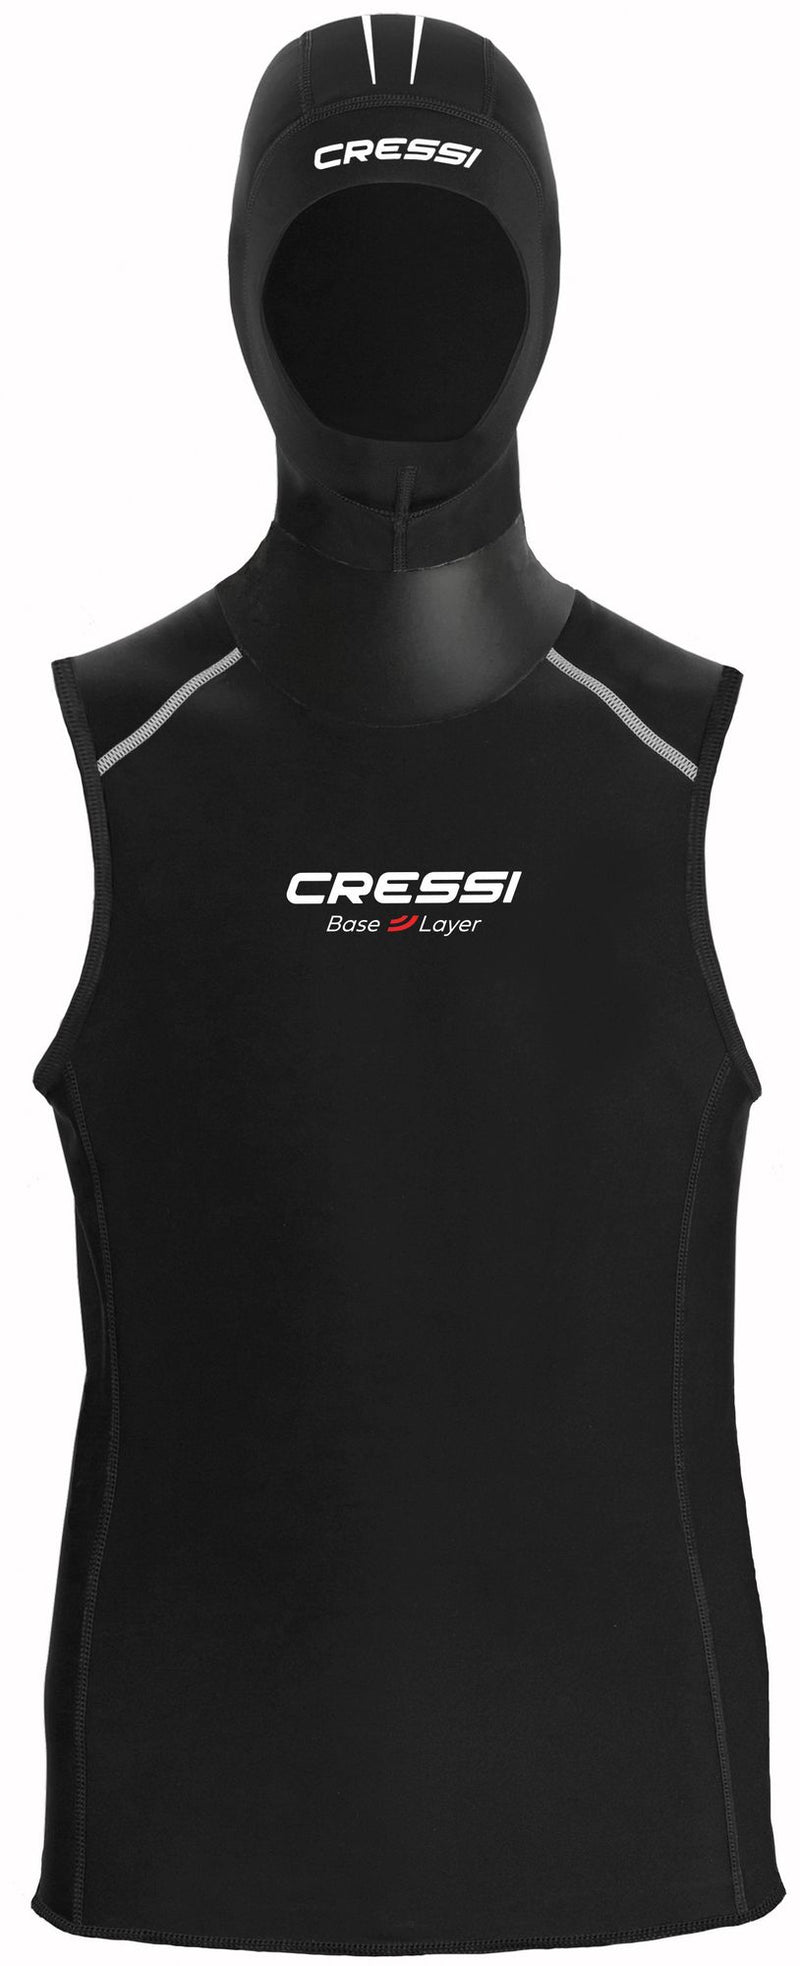 Cressi Hood Vest Base Layer Lady gilet sottomuta donna spiaggia immersion subacque apnea nuoto pesca corpett scuba diving spearfishing freediving snorkeling & beach paddling swimming neoprene vest undersuit wetsuit accessor base layer lady